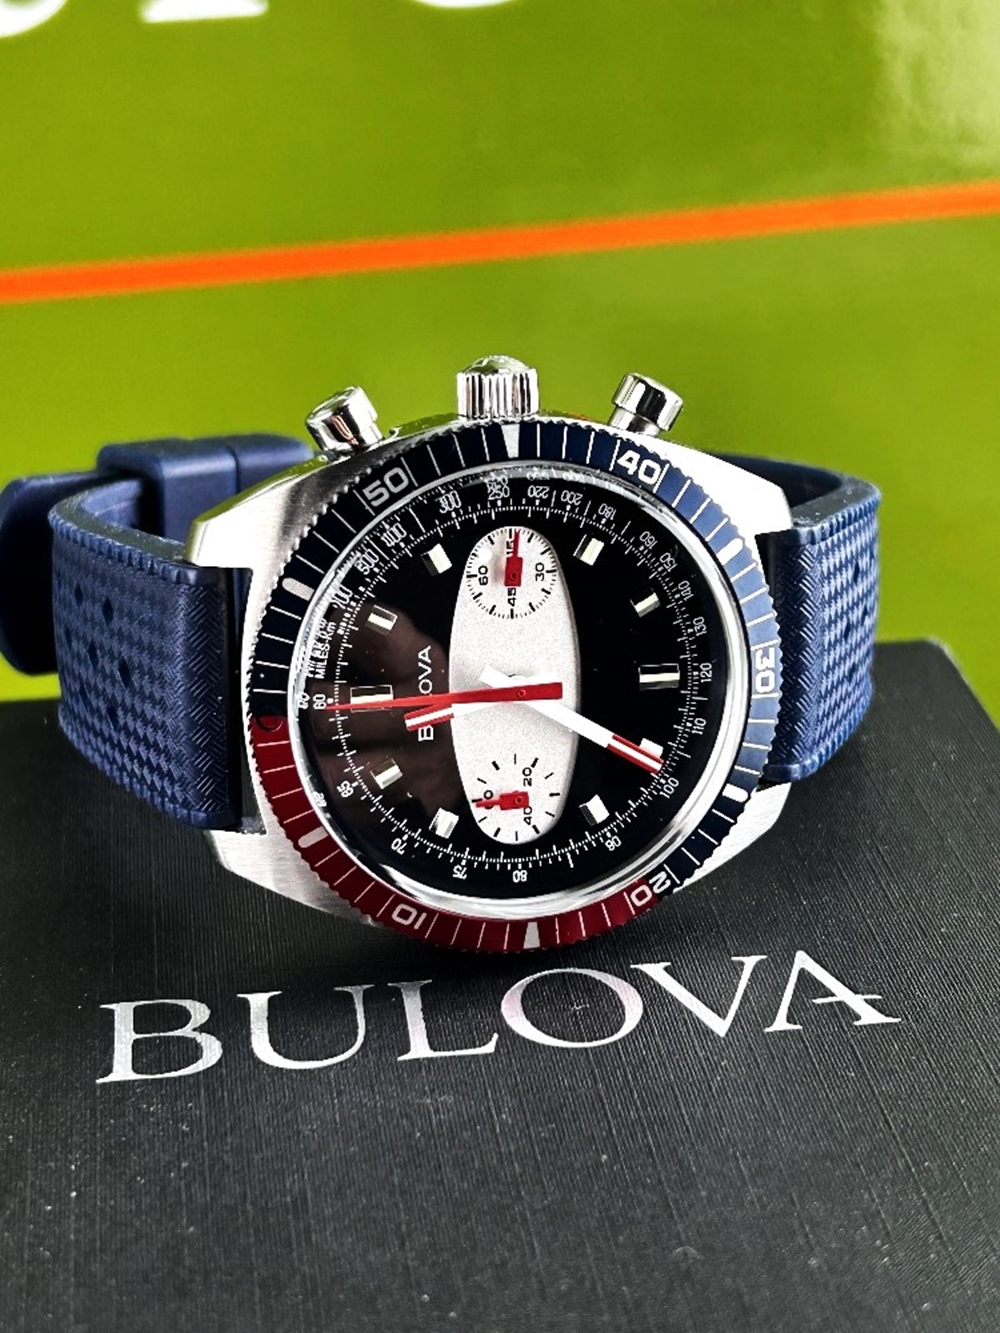 Bulova Archive Series Surfboard Chronograph Watch - Image 5 of 8